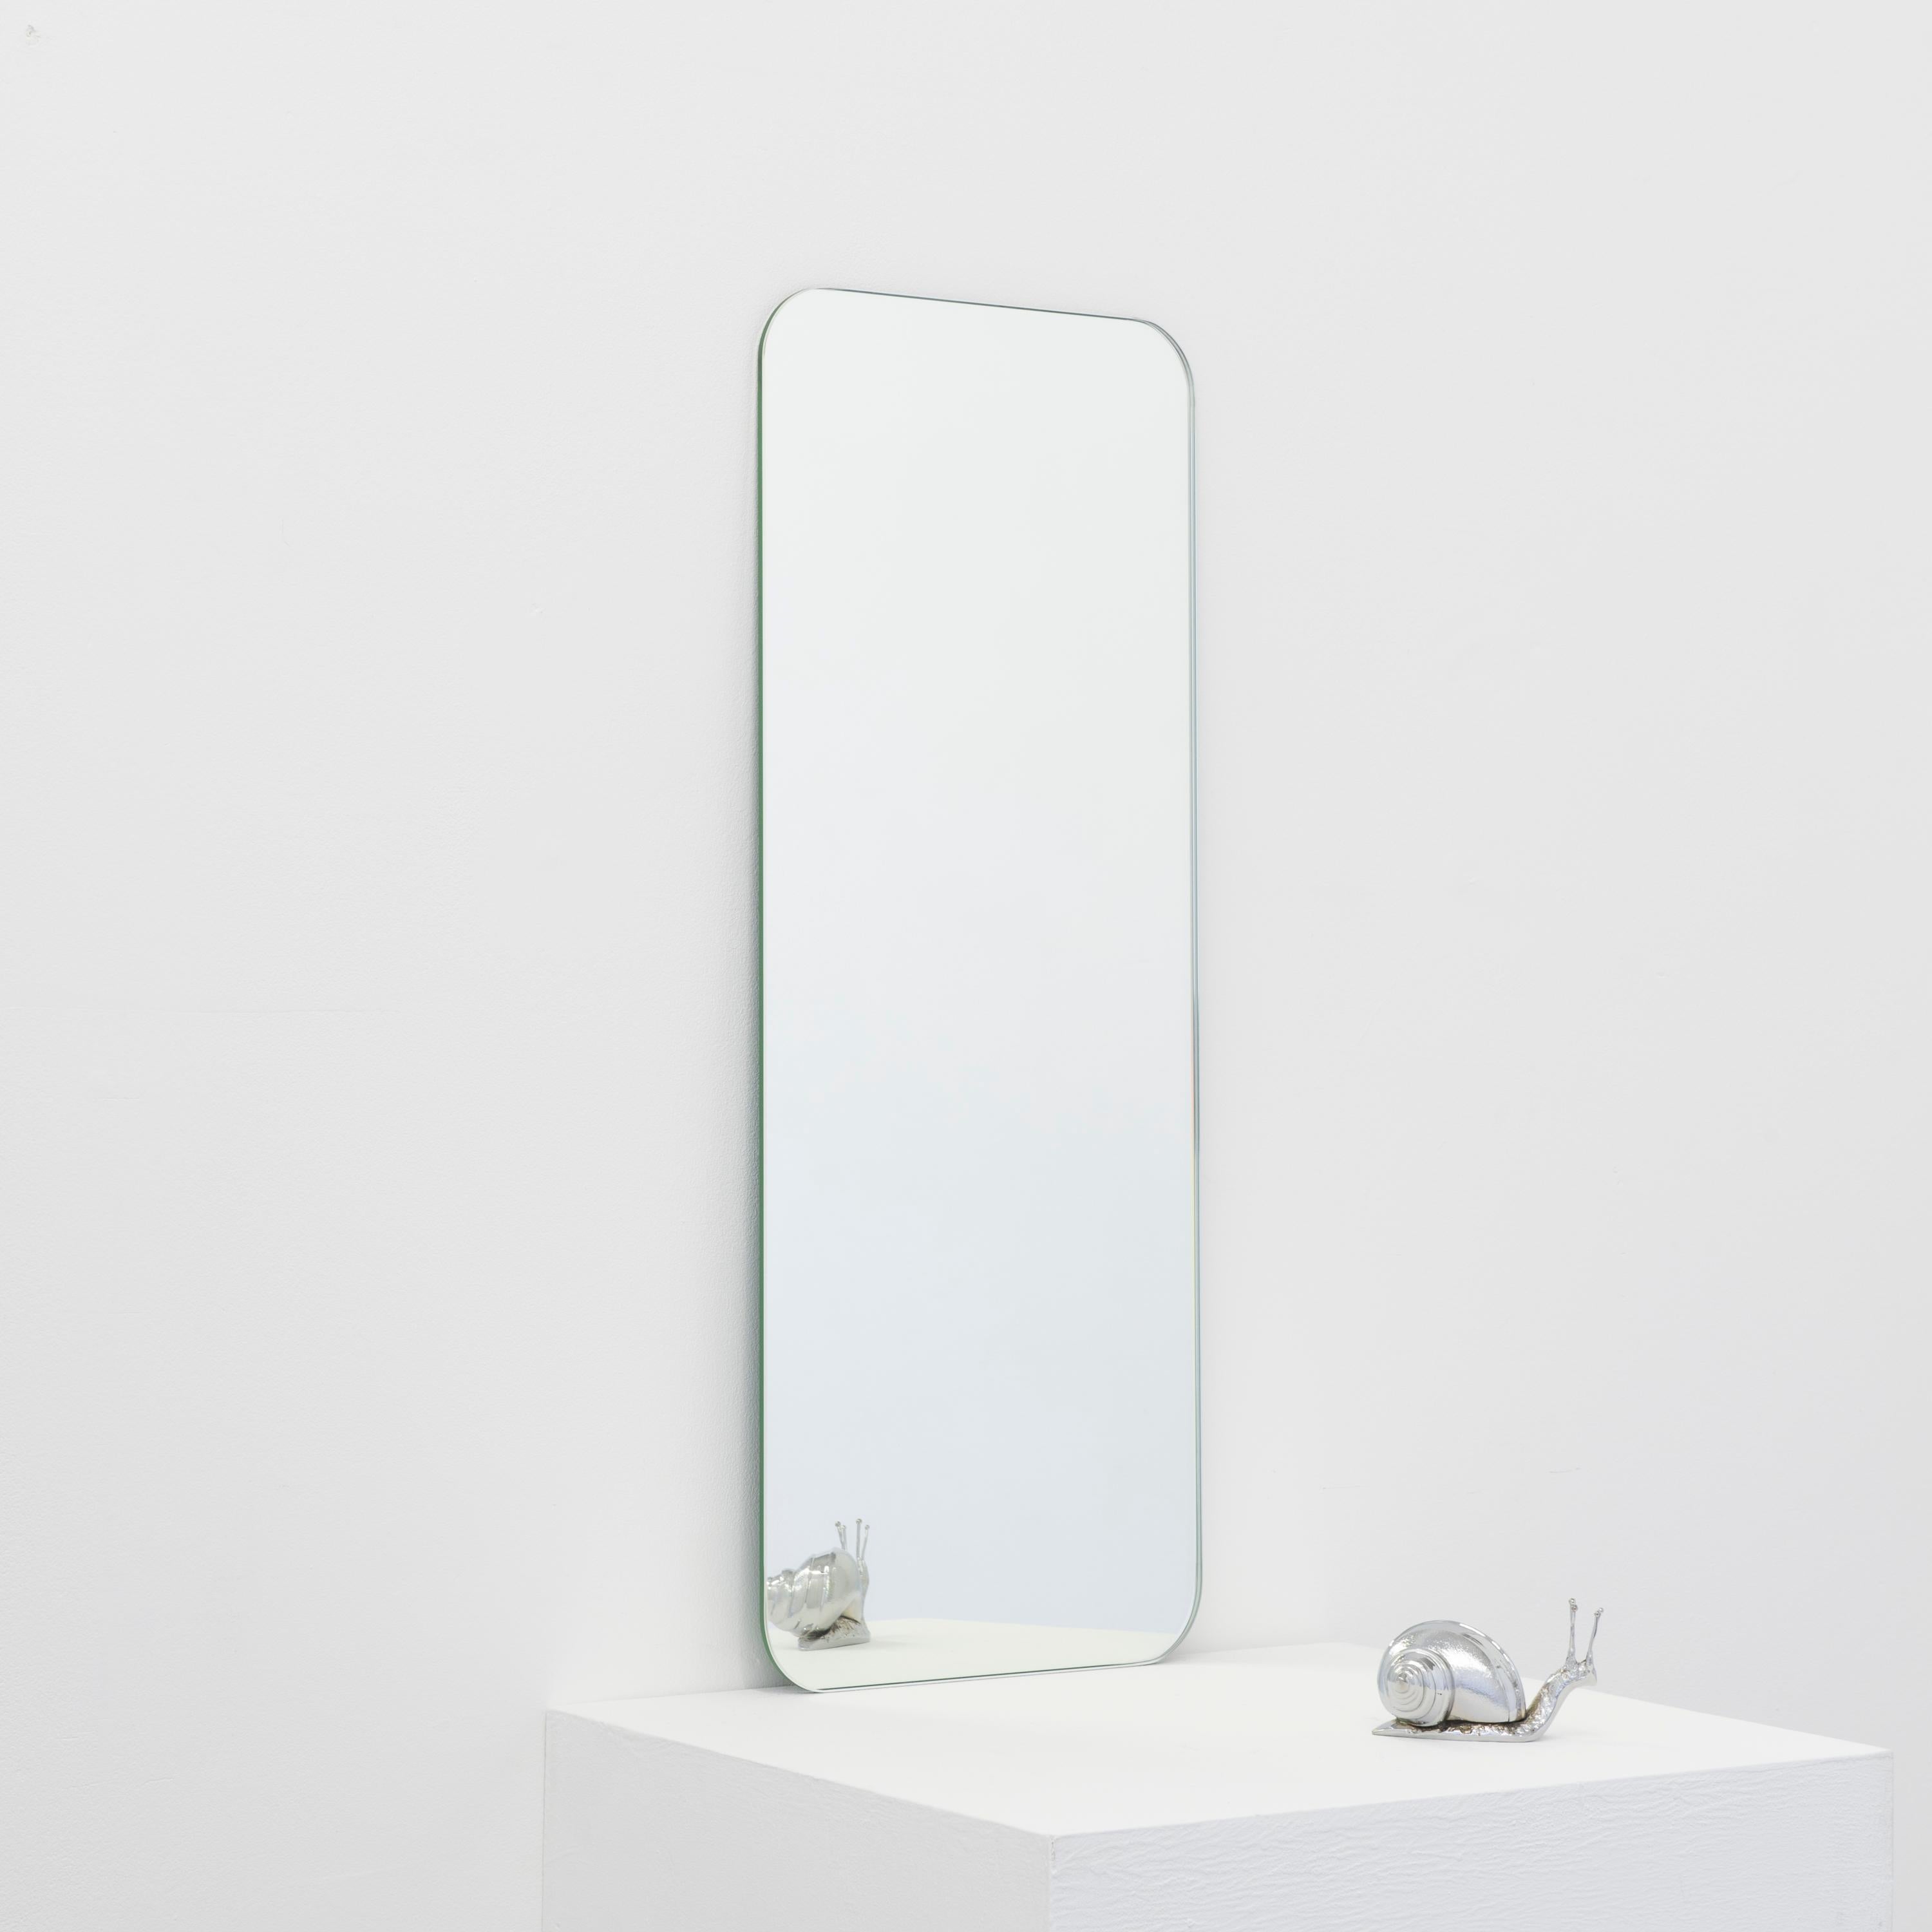 Quadris Rectangular shaped Minimalist Frameless Mirror Floating Effect, Small In New Condition For Sale In London, GB